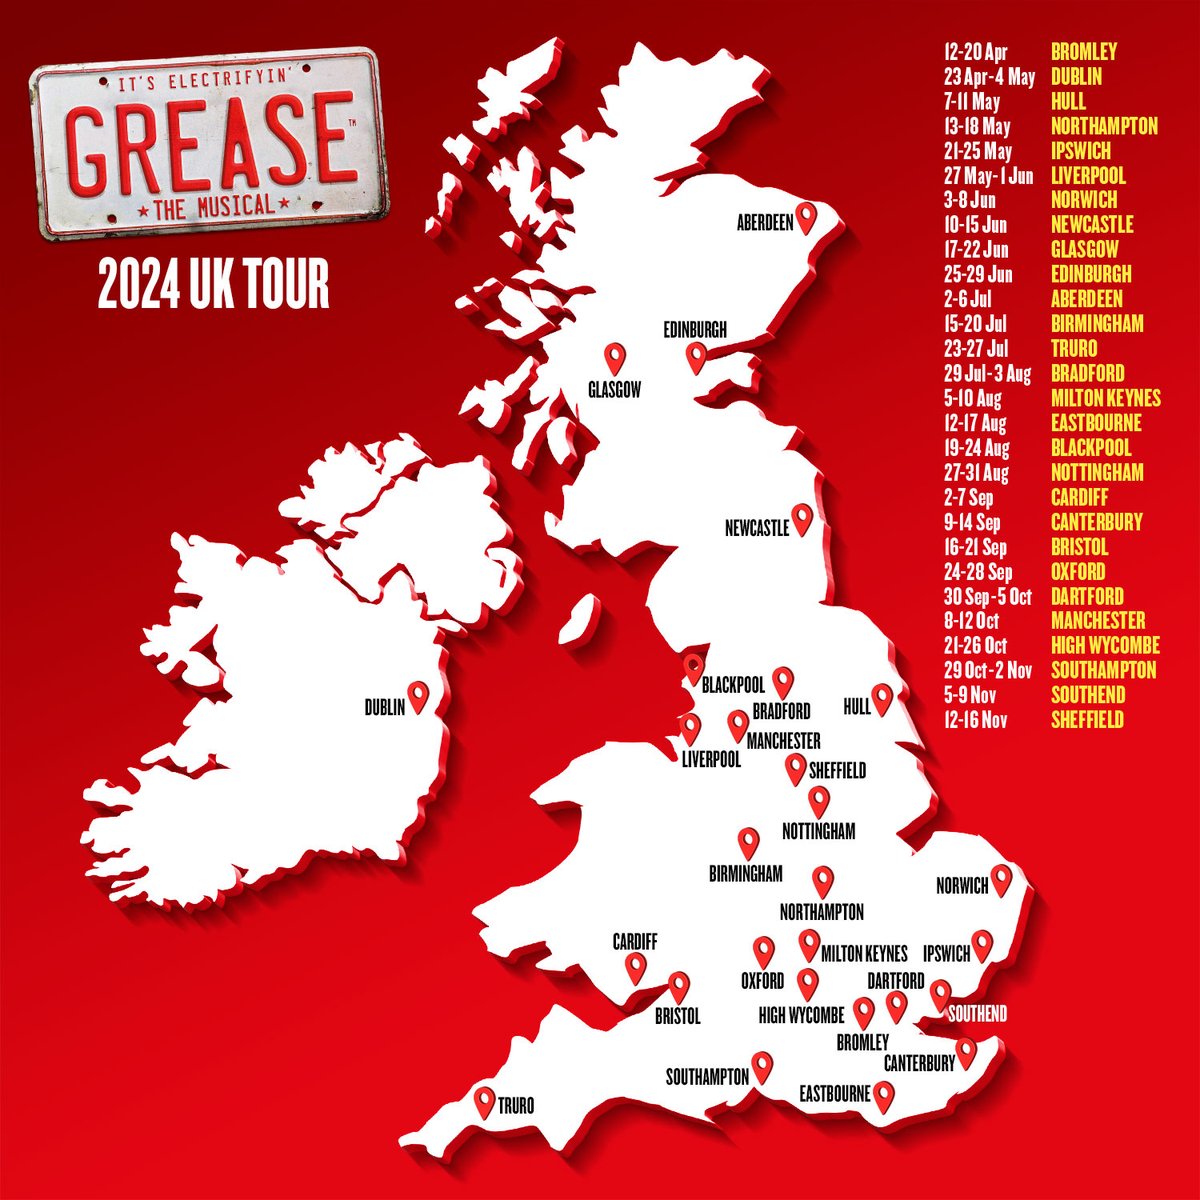 You've got plenty of opportunity to catch Grease The Musical live on stage this year. Check out our tour schedule at greasemusical.co.uk #GreaseIsTheWord